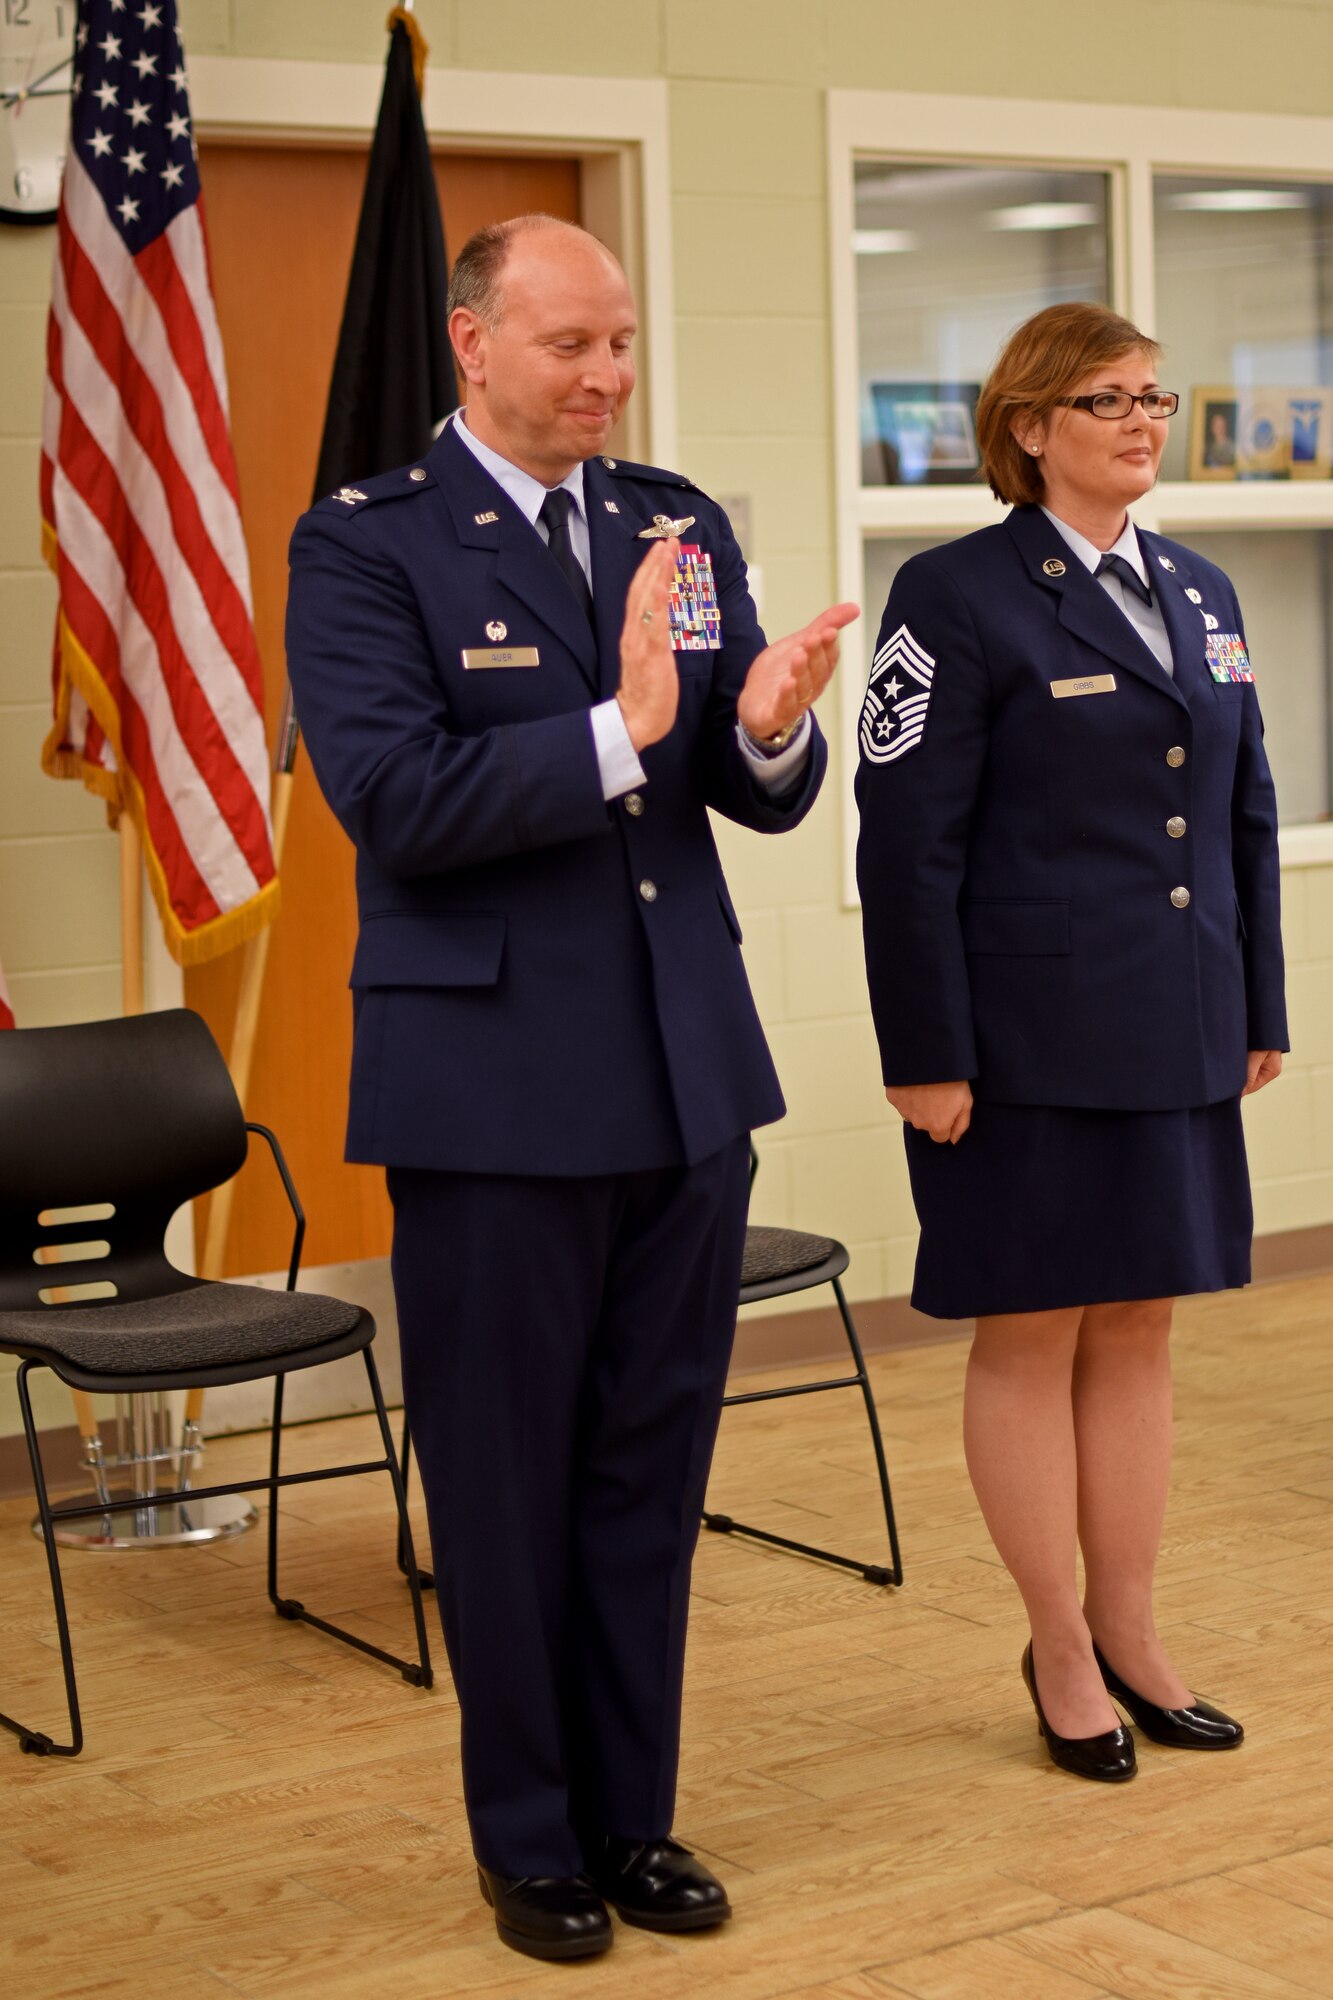 U.S. Air Force Col. Mark Auer (left), 121st Air Refueling Wing commander, and Chief Master Sgt. Kelly Gibbs (right), command chief, take part in an assumption of command ceremony on June 11, 2016, Rickenbacker Air National Guard Base, Ohio. As the unit's newest command chief, Chief Master Sgt. Gibbs is responsible for advising the commander on matters of mission effectiveness; readiness; training and the health, morale and welfare of all 121 ARW enlisted members. (U.S. Air National Guard photo by Senior Airman Wendy Kuhn/Released)